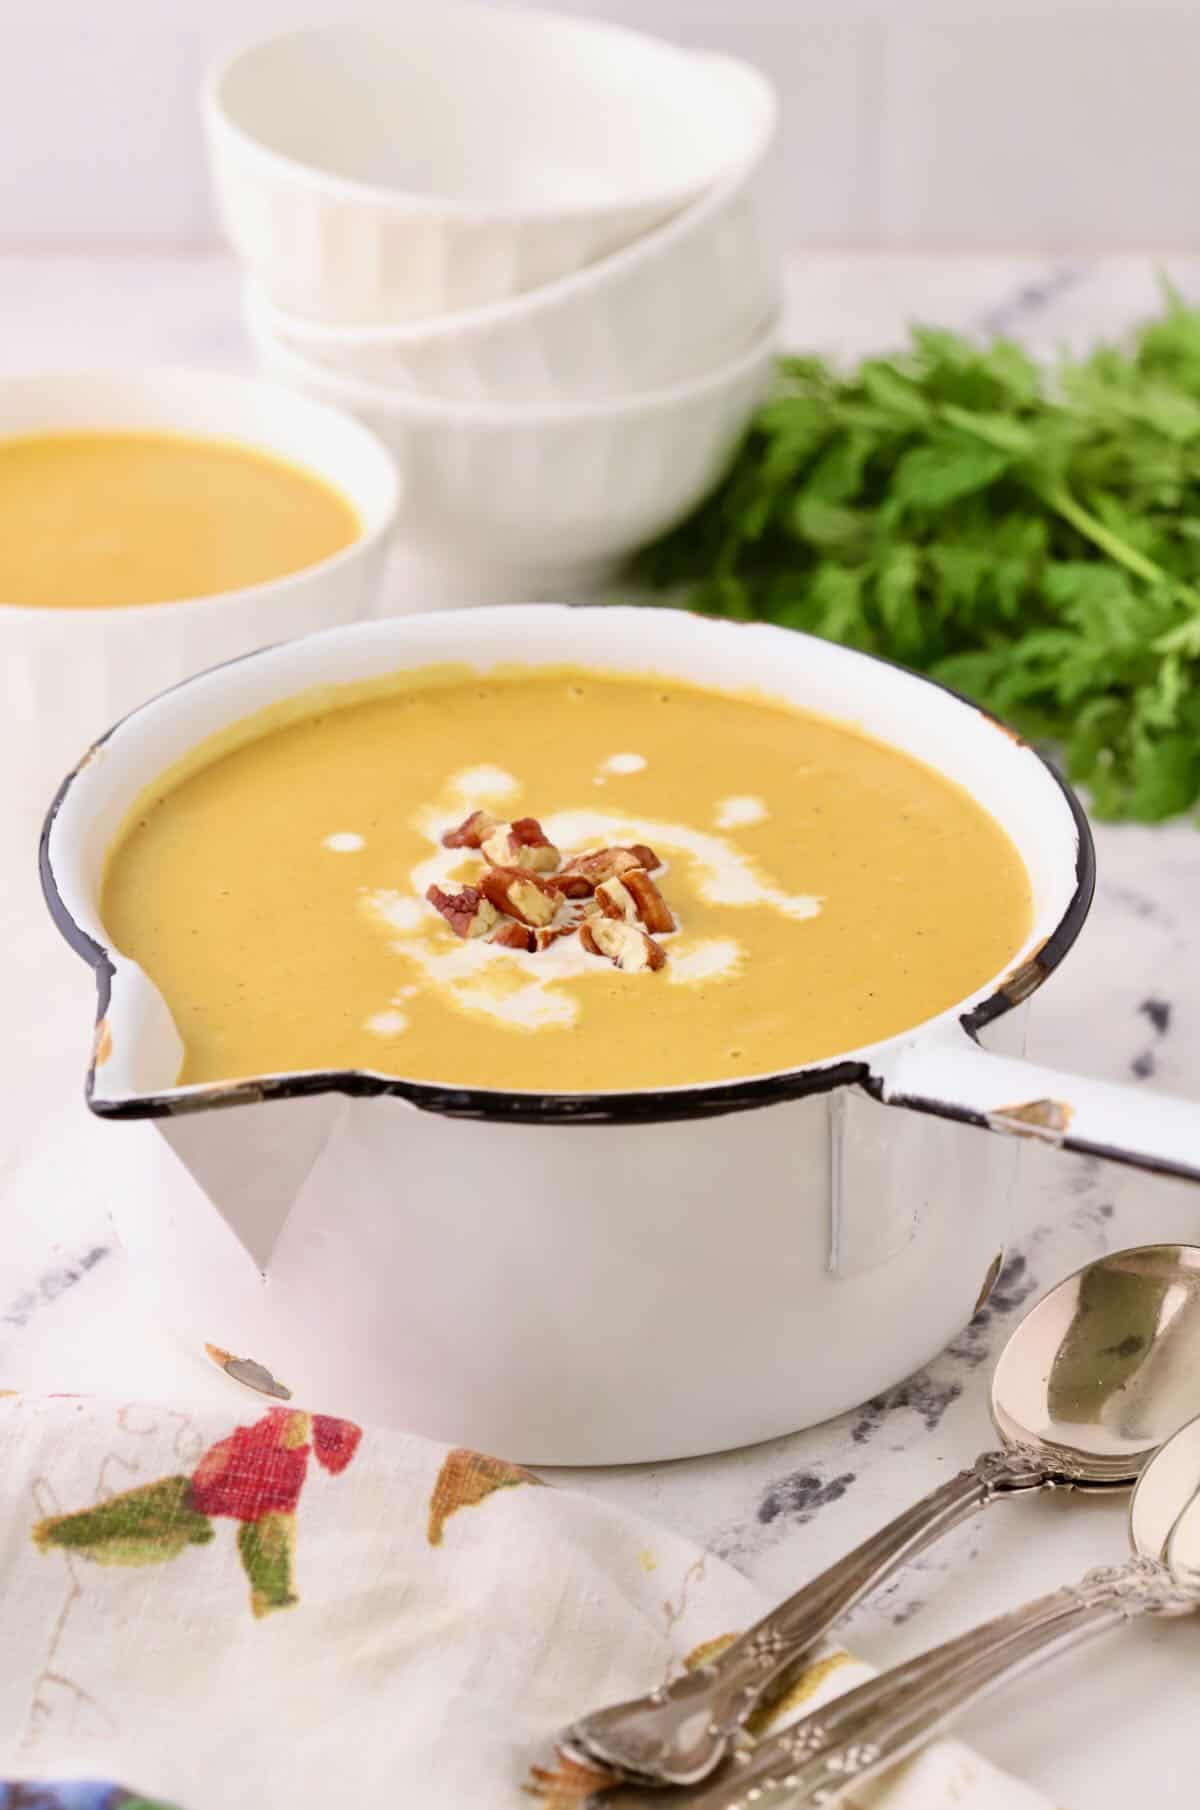 A white saucepan full of sweet potato carrot soup, garnished with pecans.